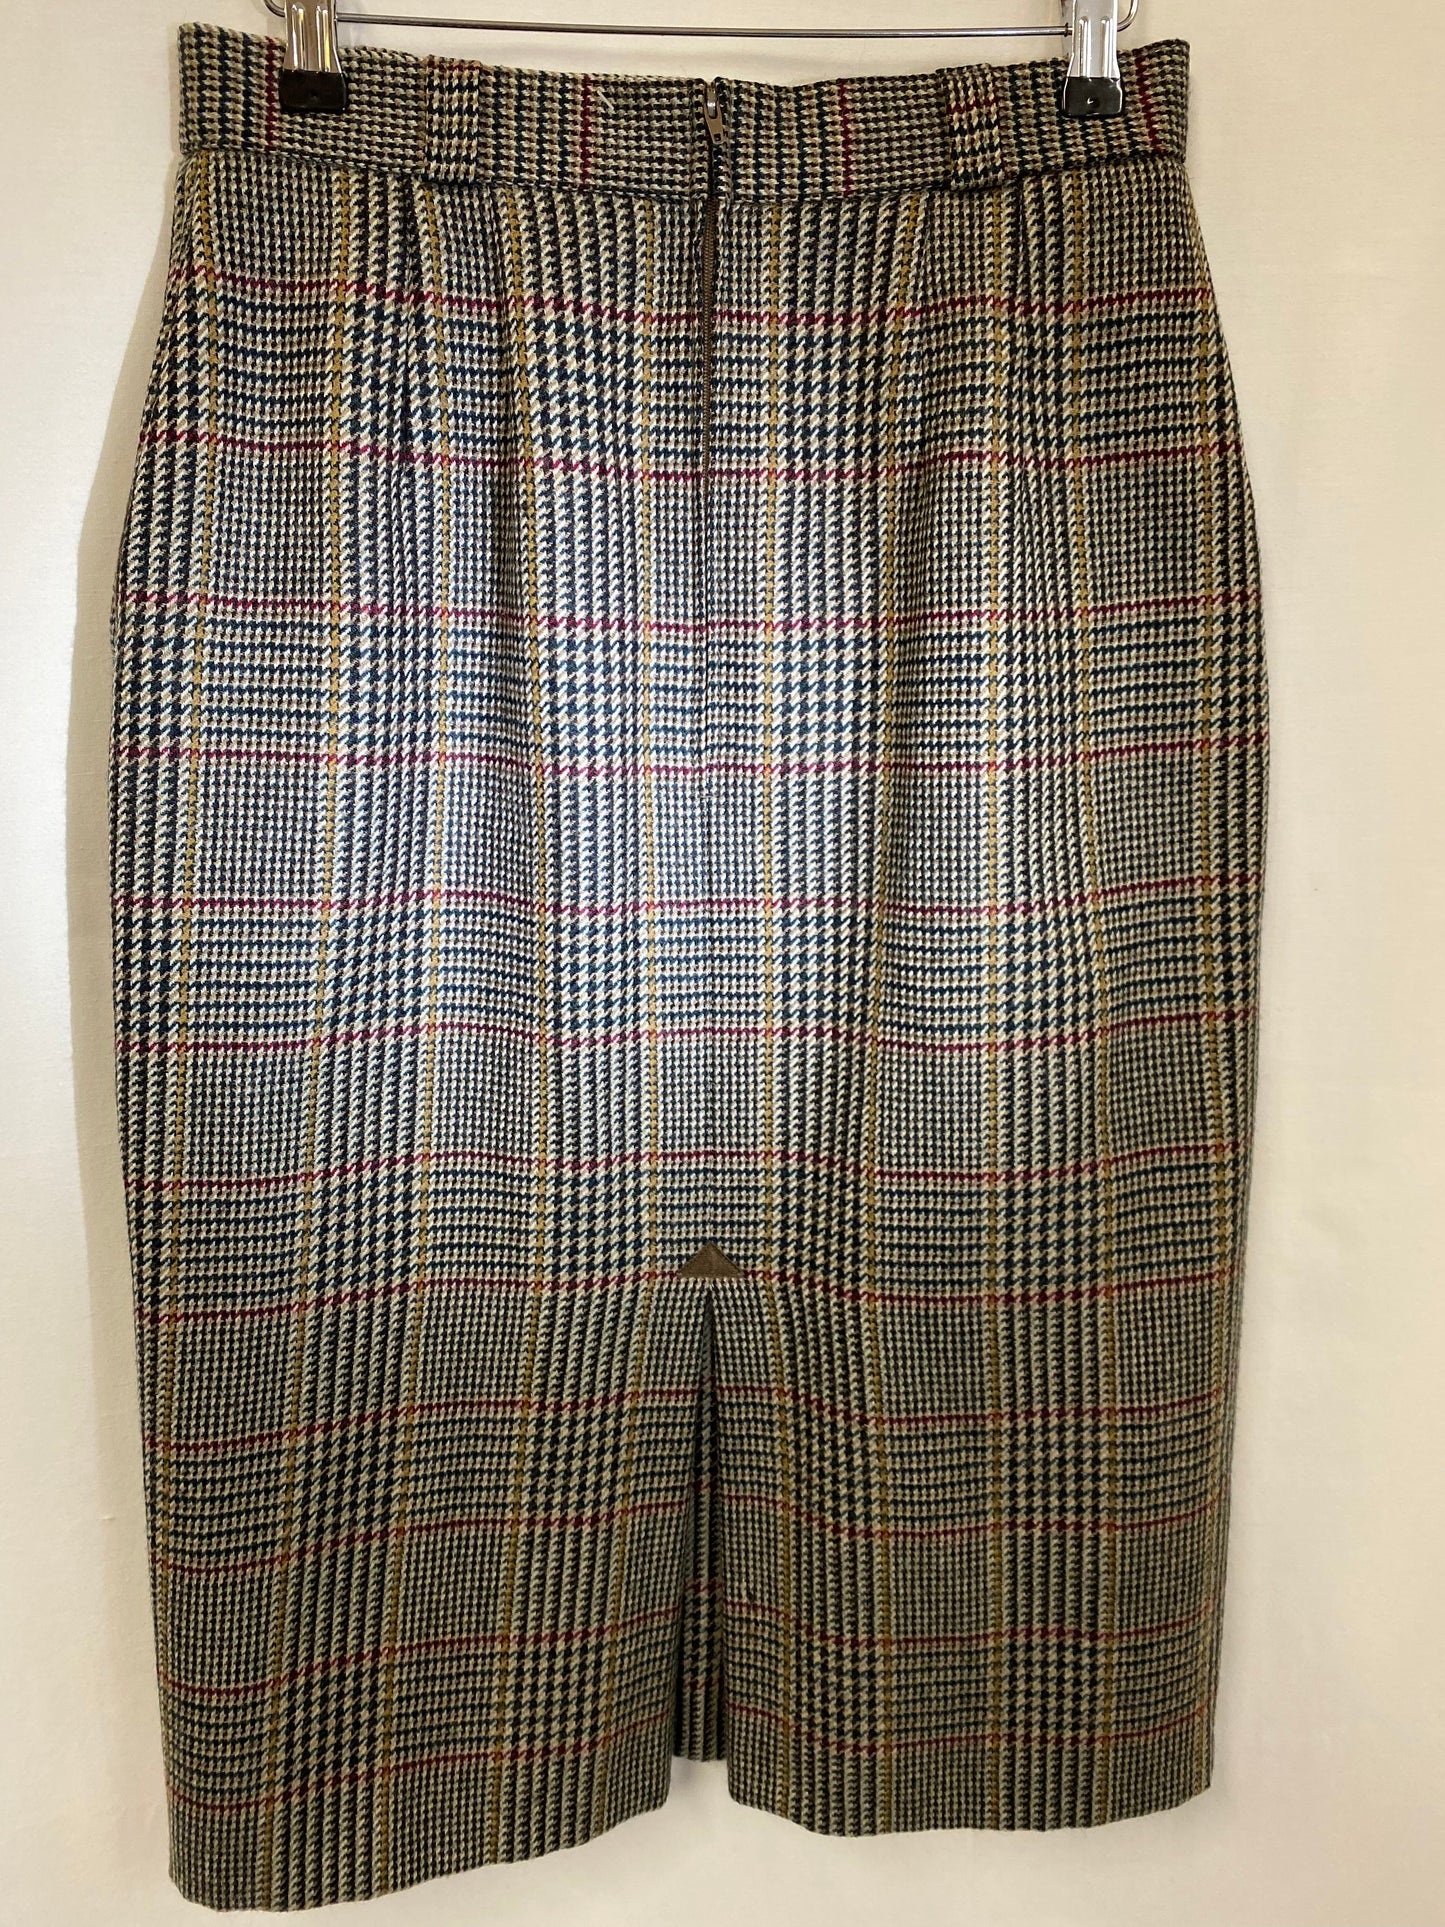 Vintage St Michael Green, Red and Mustard Tweed Skirt Size 10/12